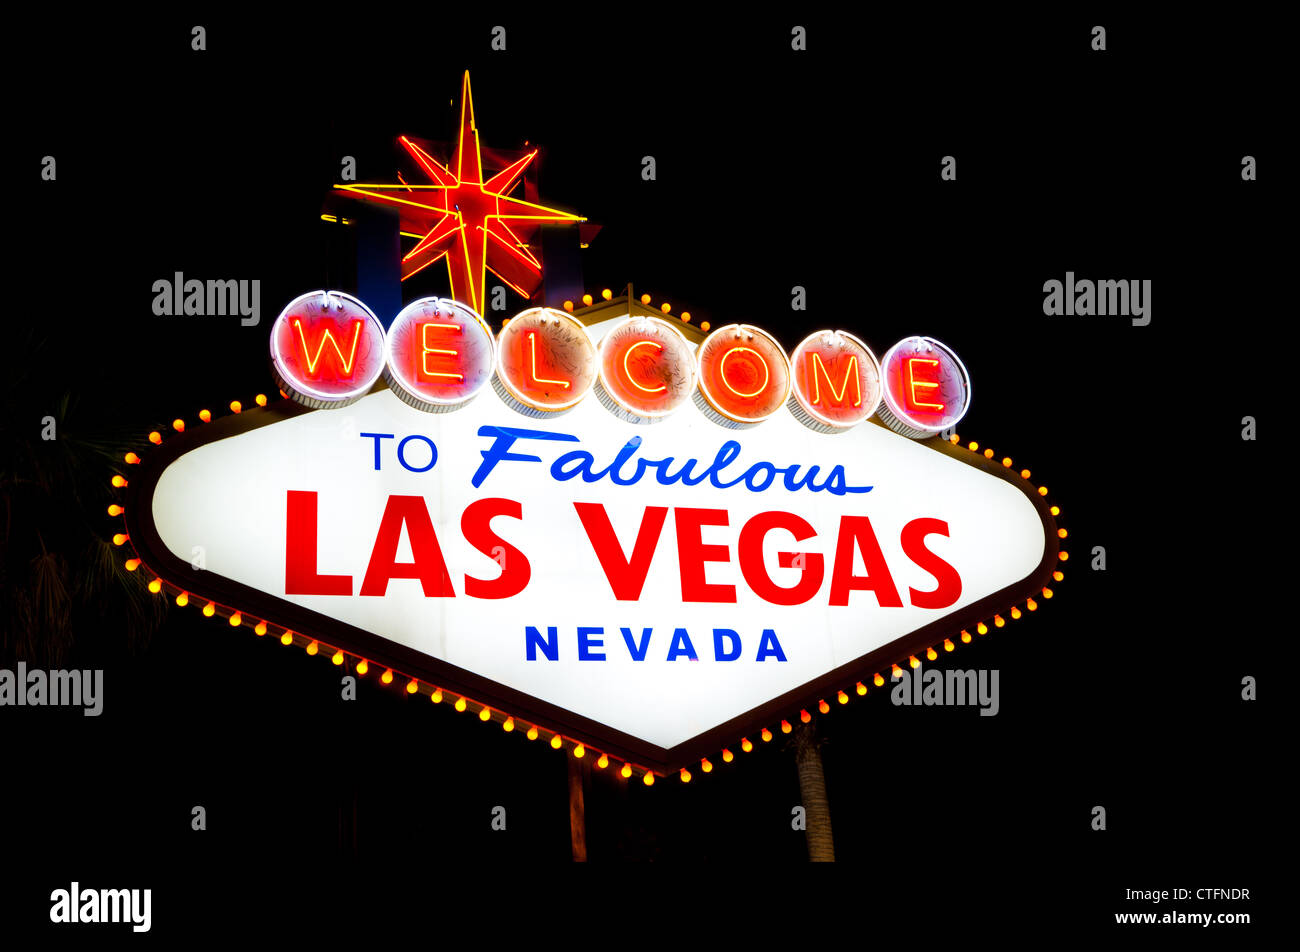 The neon 'Welcome to Las Vegas' sign at night Stock Photo